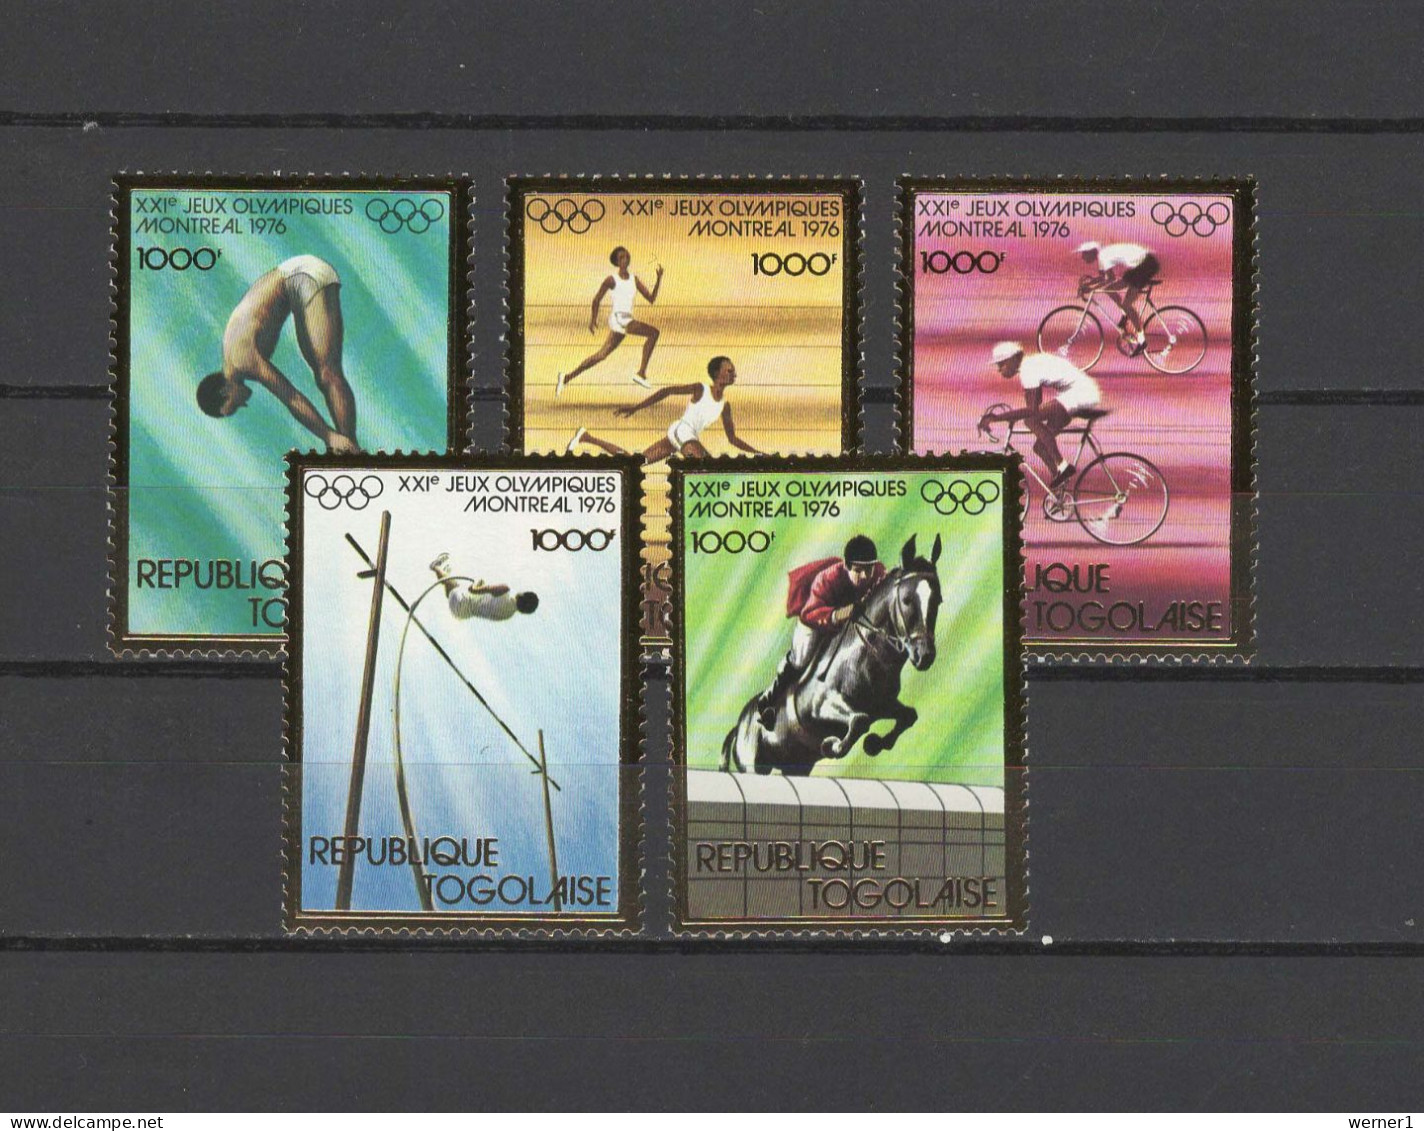 Togo 1976 Olympic Games Montreal, Athletics, Cycling, Equestrian Set Of 5 MNH -scarce- - Sommer 1976: Montreal